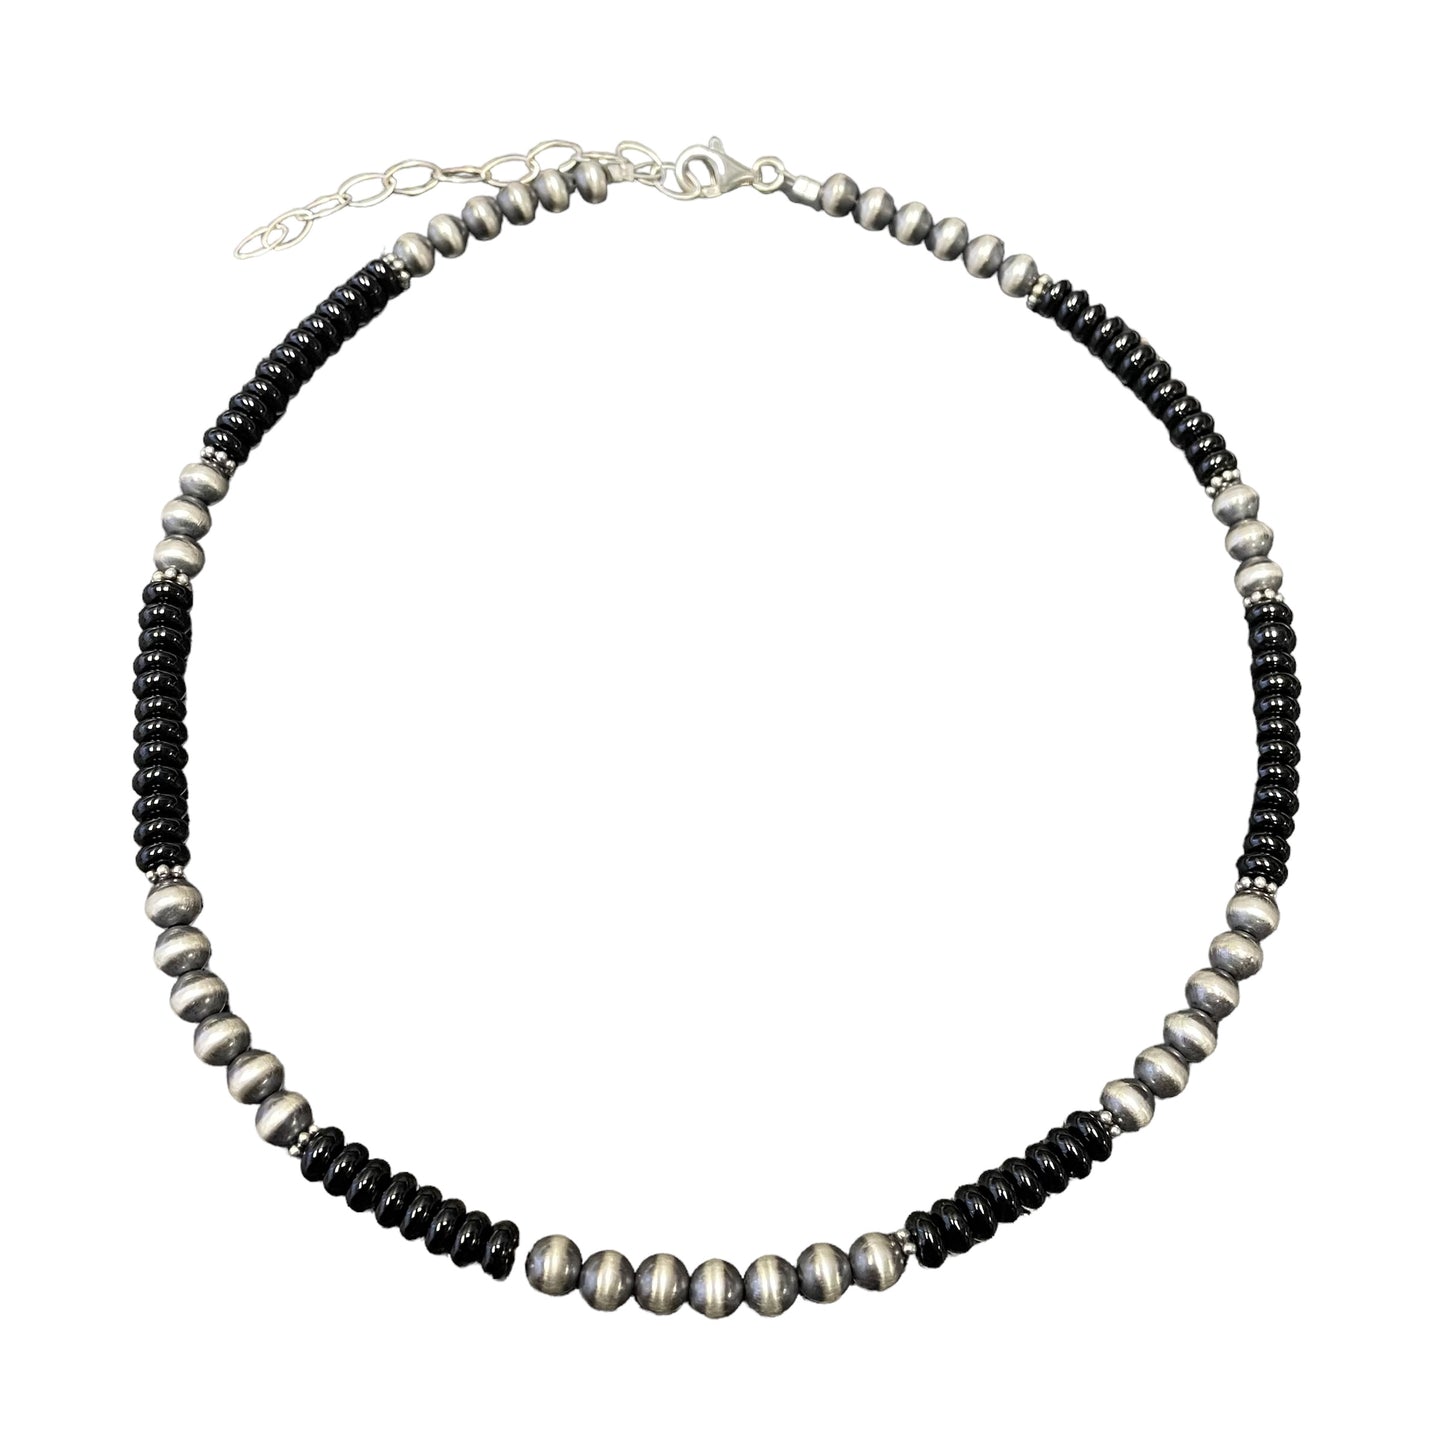 Onyx Desert Pearl Bead Necklace Sterling Silver